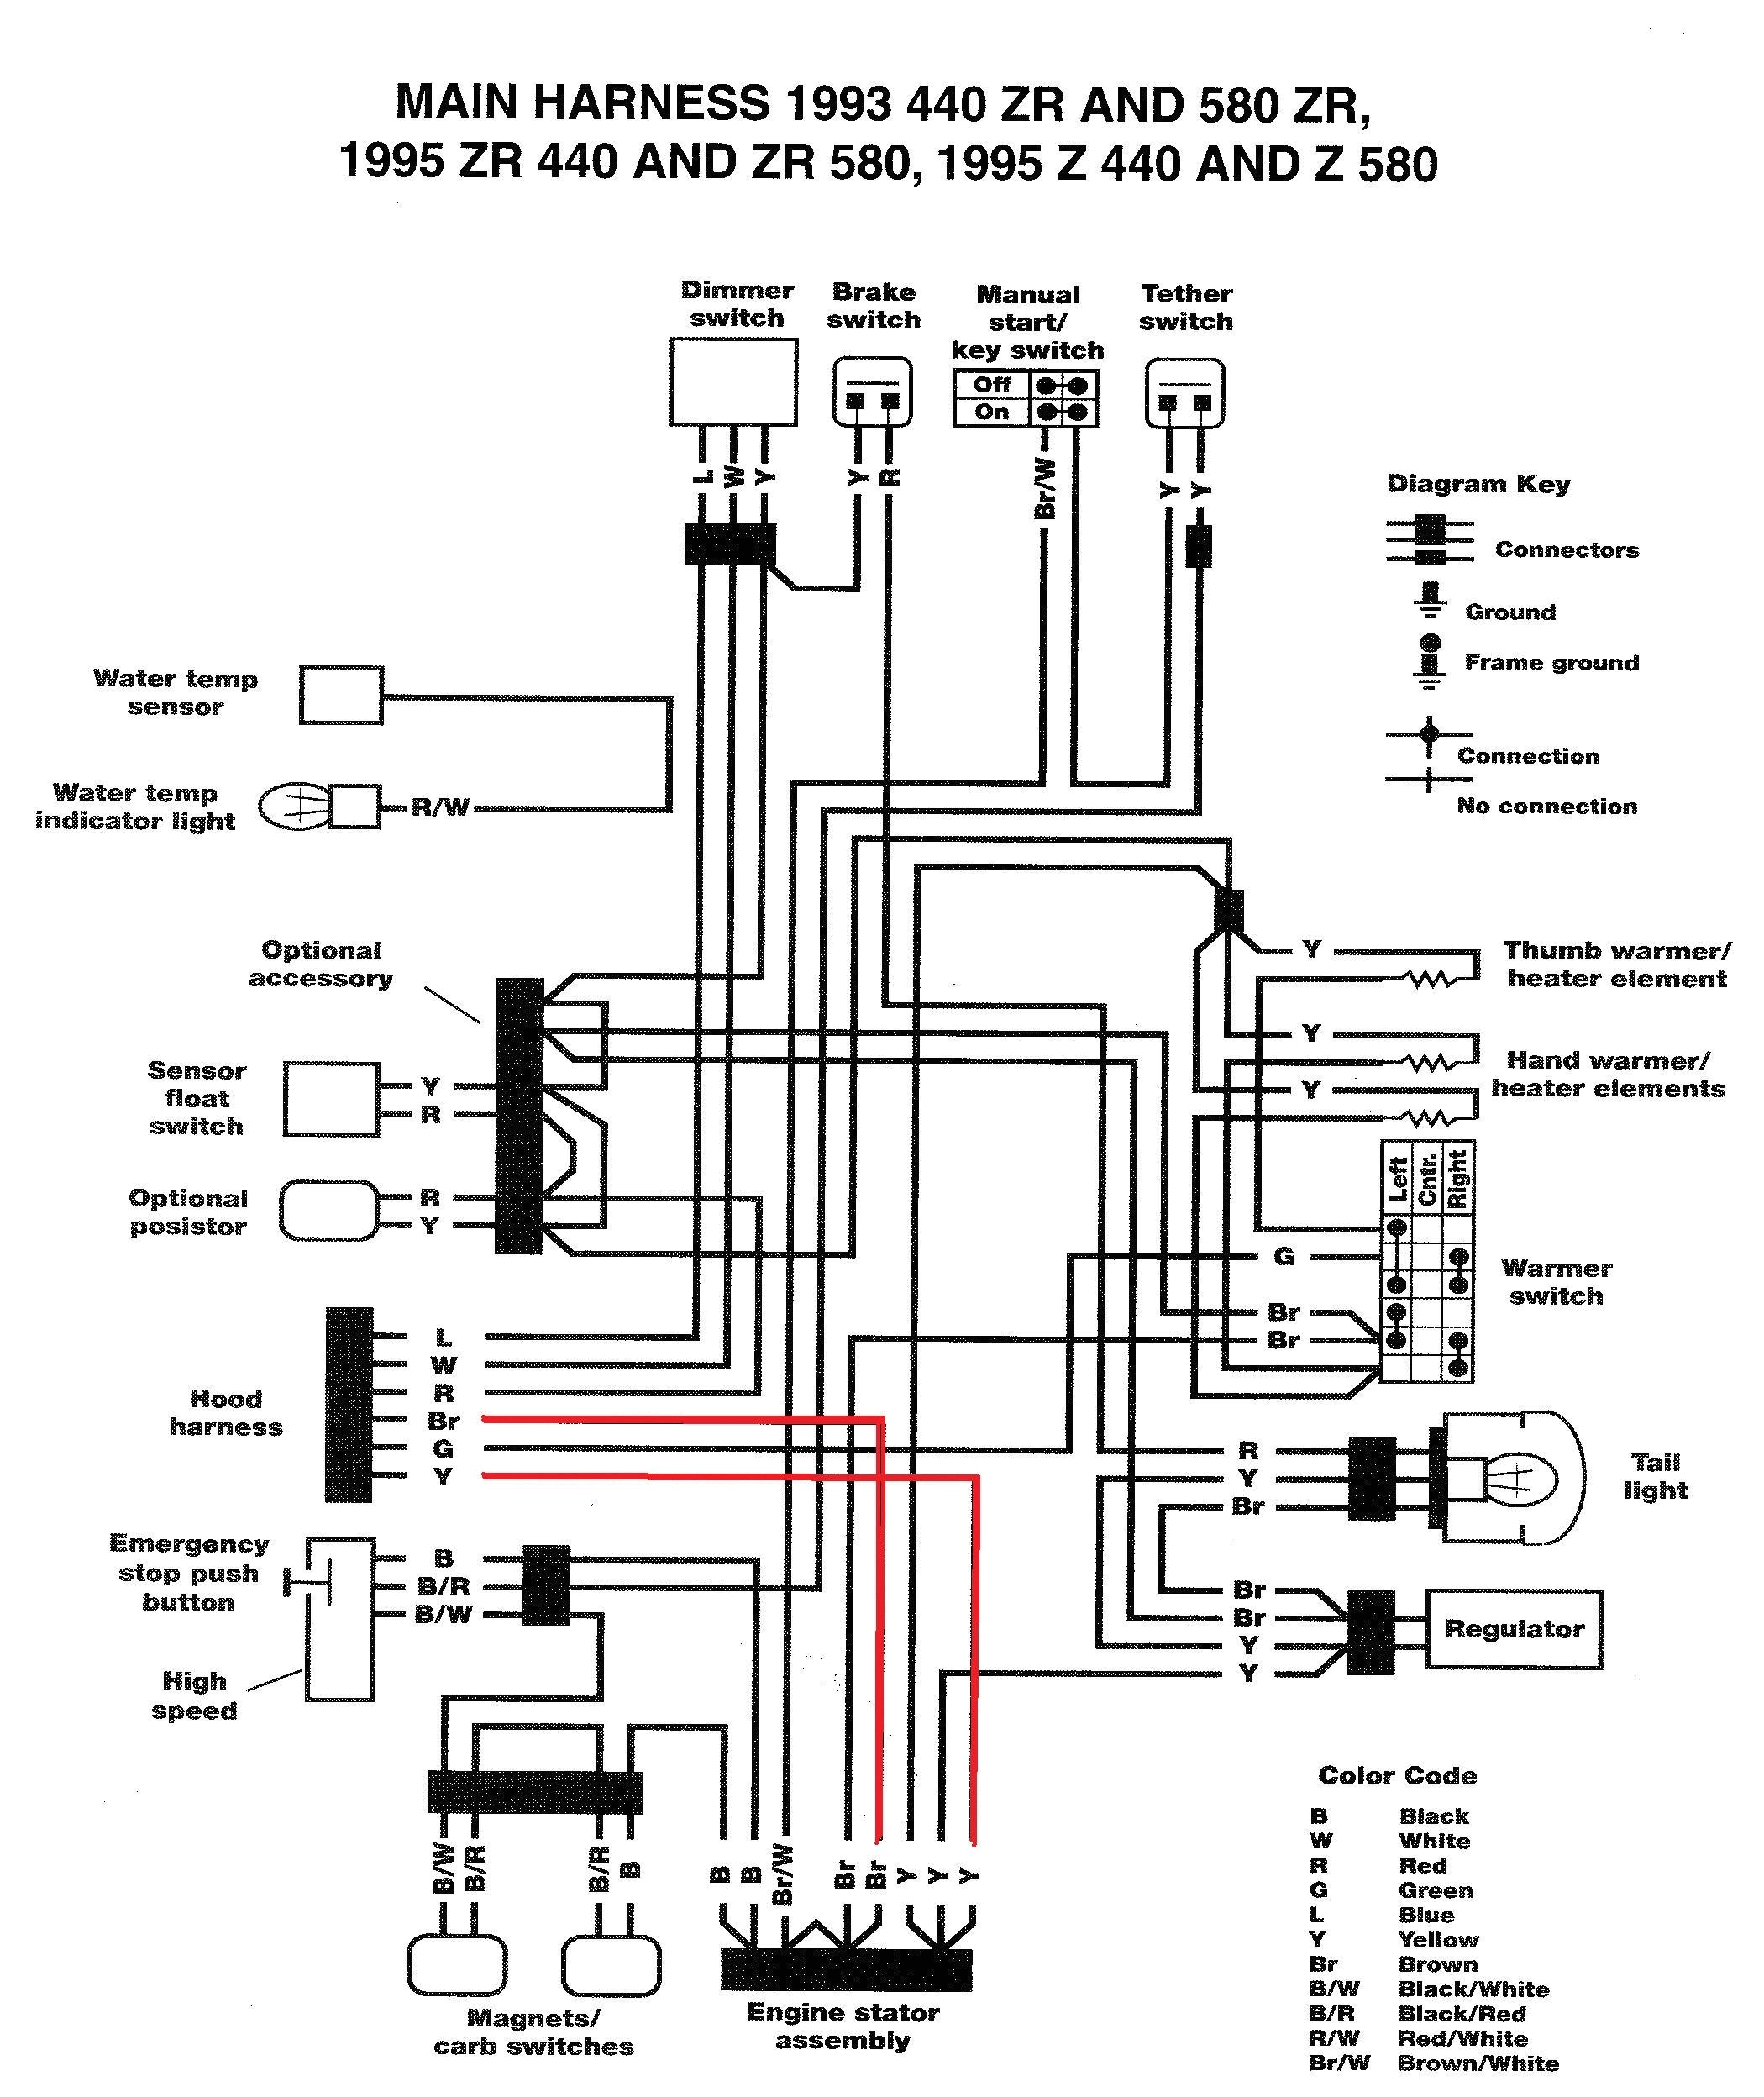 wiring diagram likewise on yamaha wolverine atv winch solenoid mix grizzly 300 wiring diagram wiring diagram